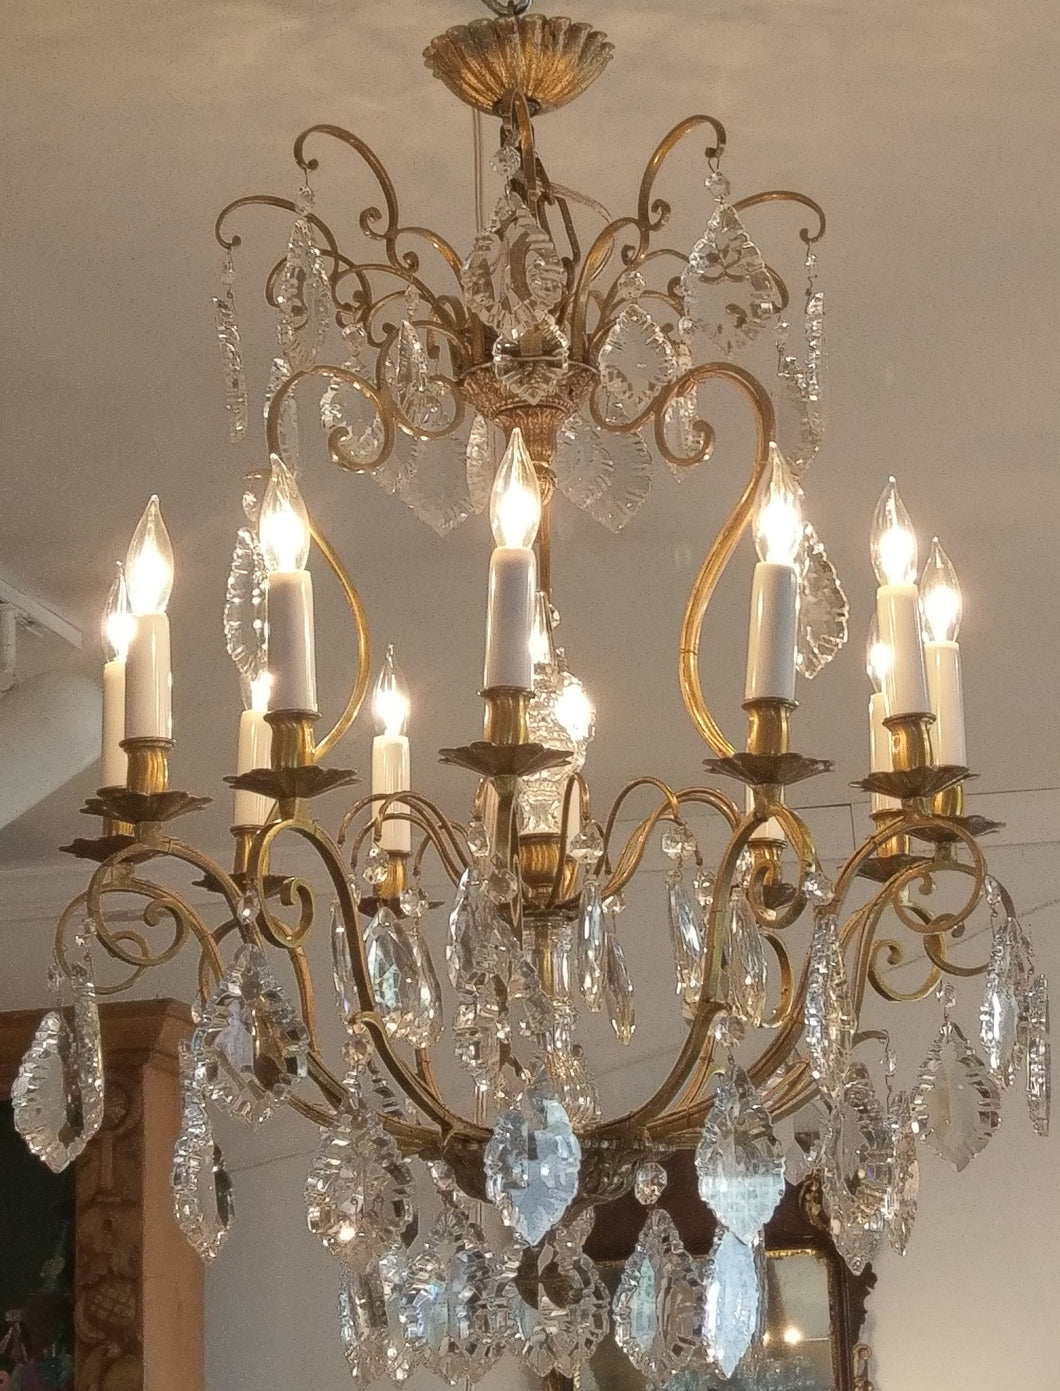 Ornate French 1920s Chandelier